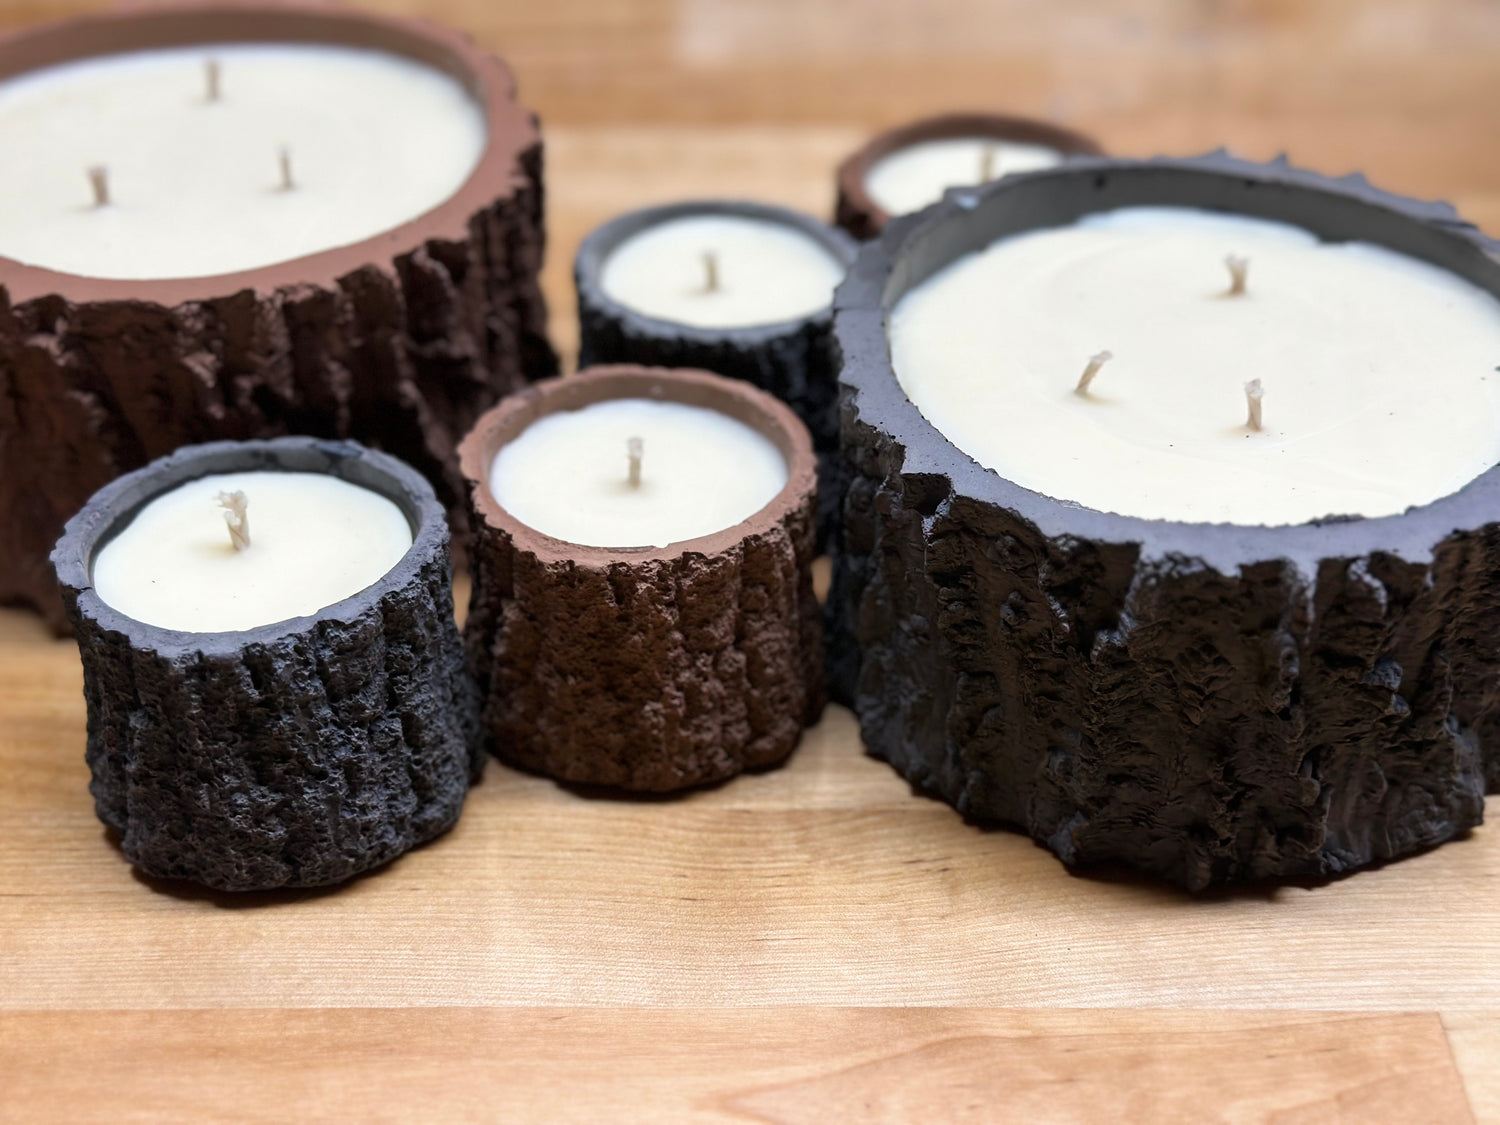 Forest Candles